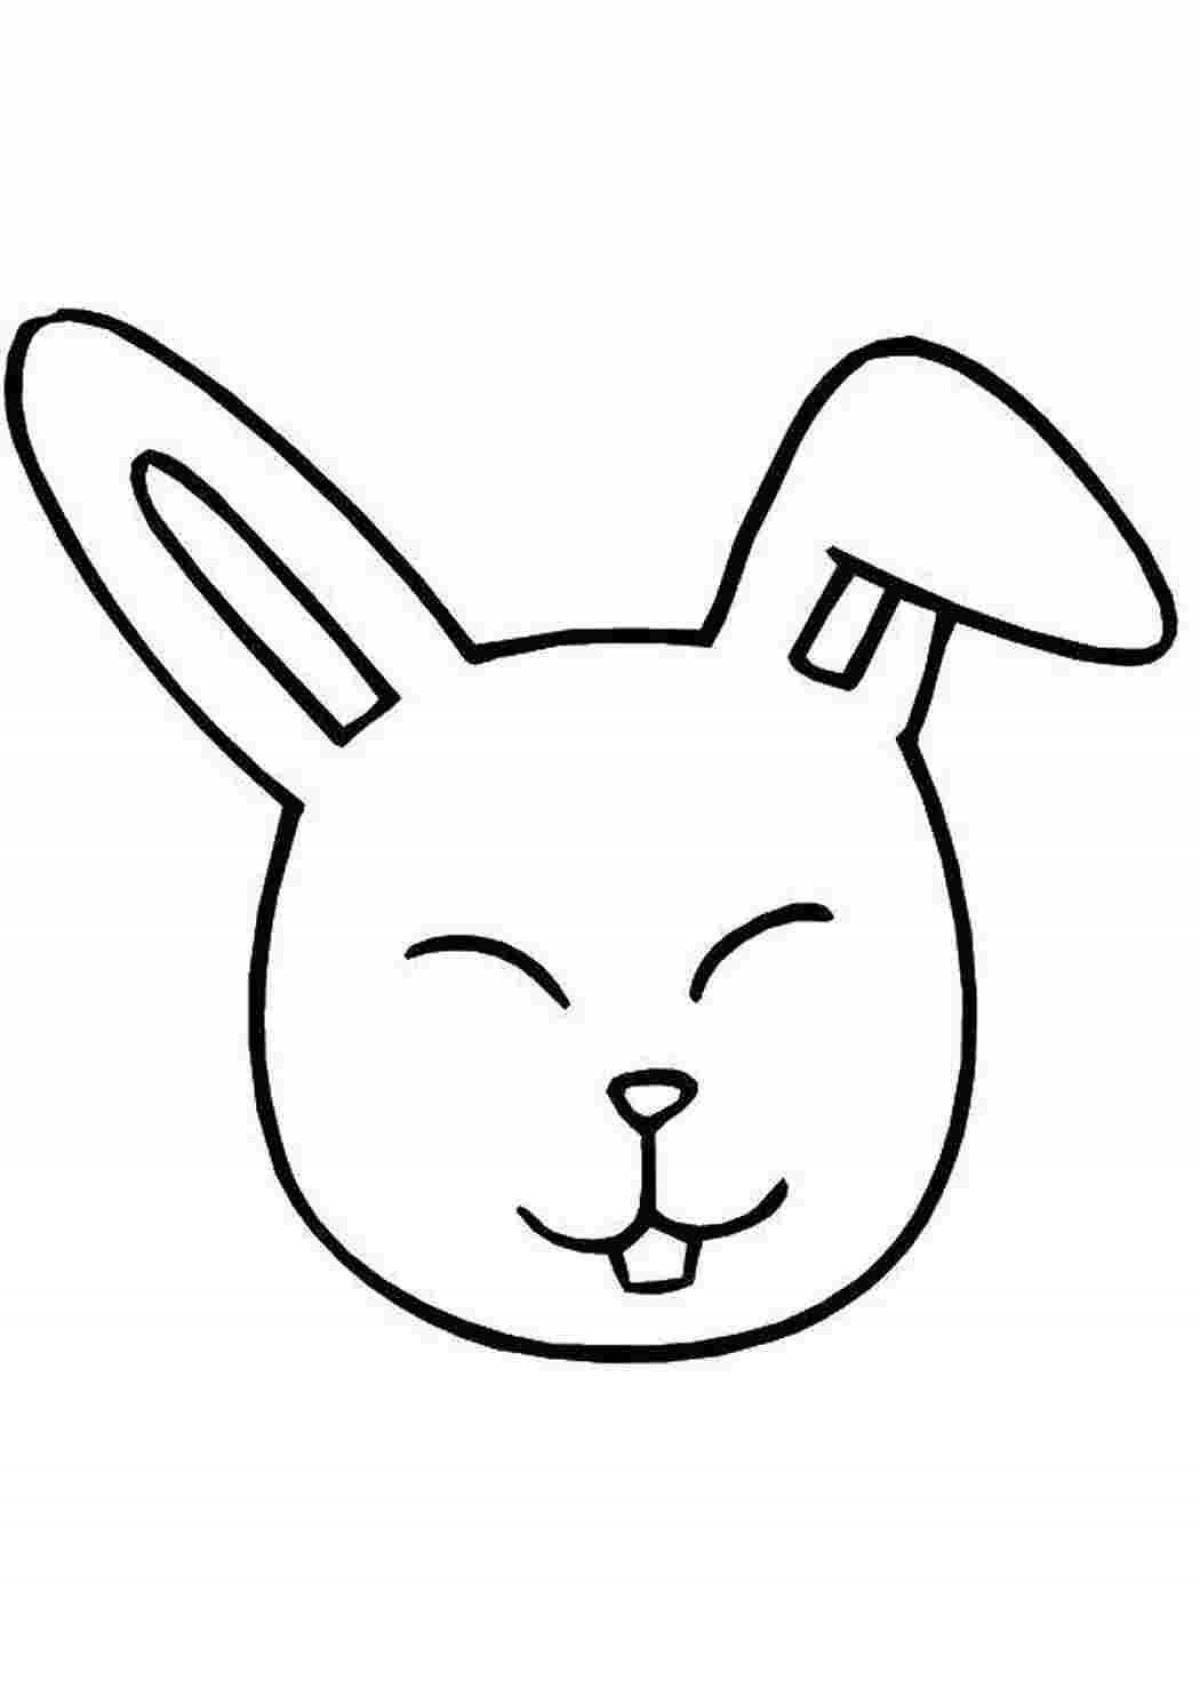 Coloring page charming muzzle of a hare